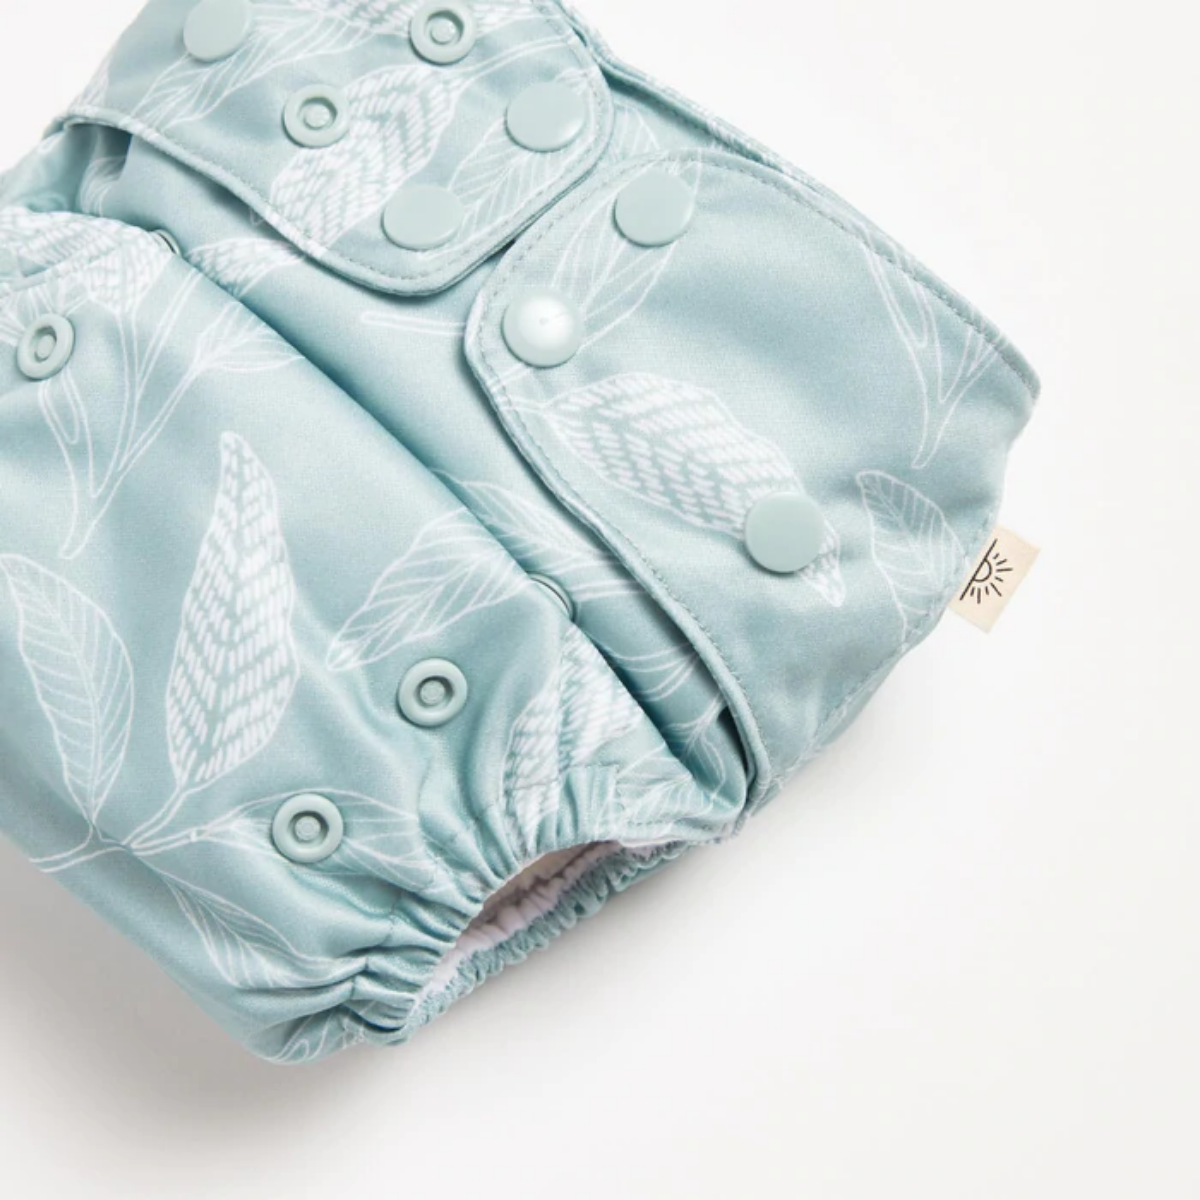 A close up of Ocean Native 2.0 Modern Cloth Nappy with white native prints on it by EcoNaps.